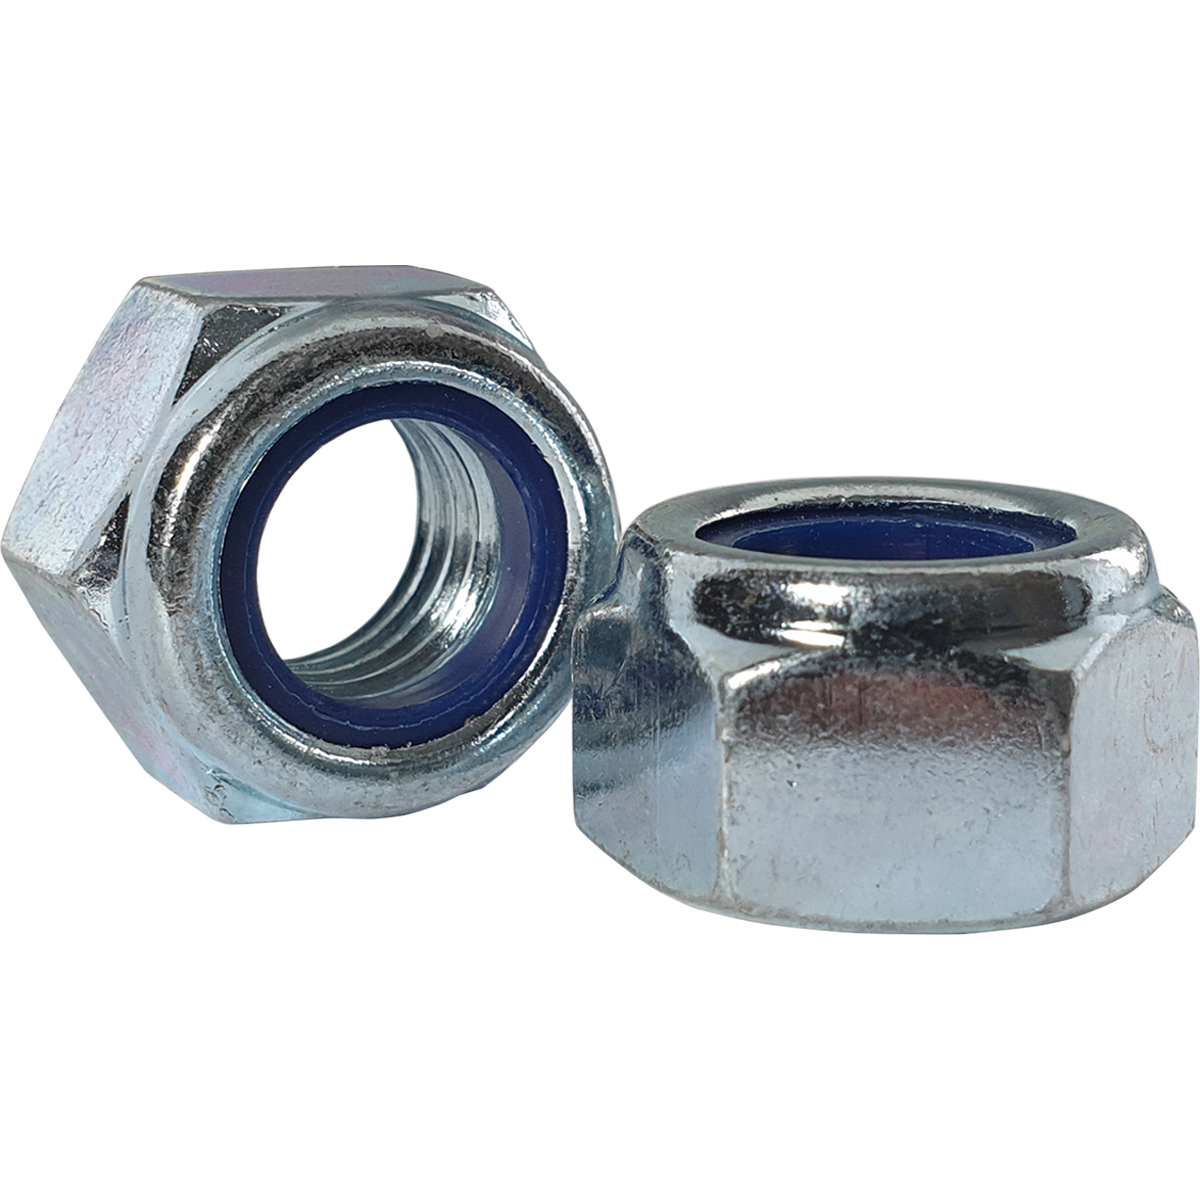 Metric fine, zinc plated, nylon insert nuts, also known as Nyloc nuts are available in various diameters at competitive prices.